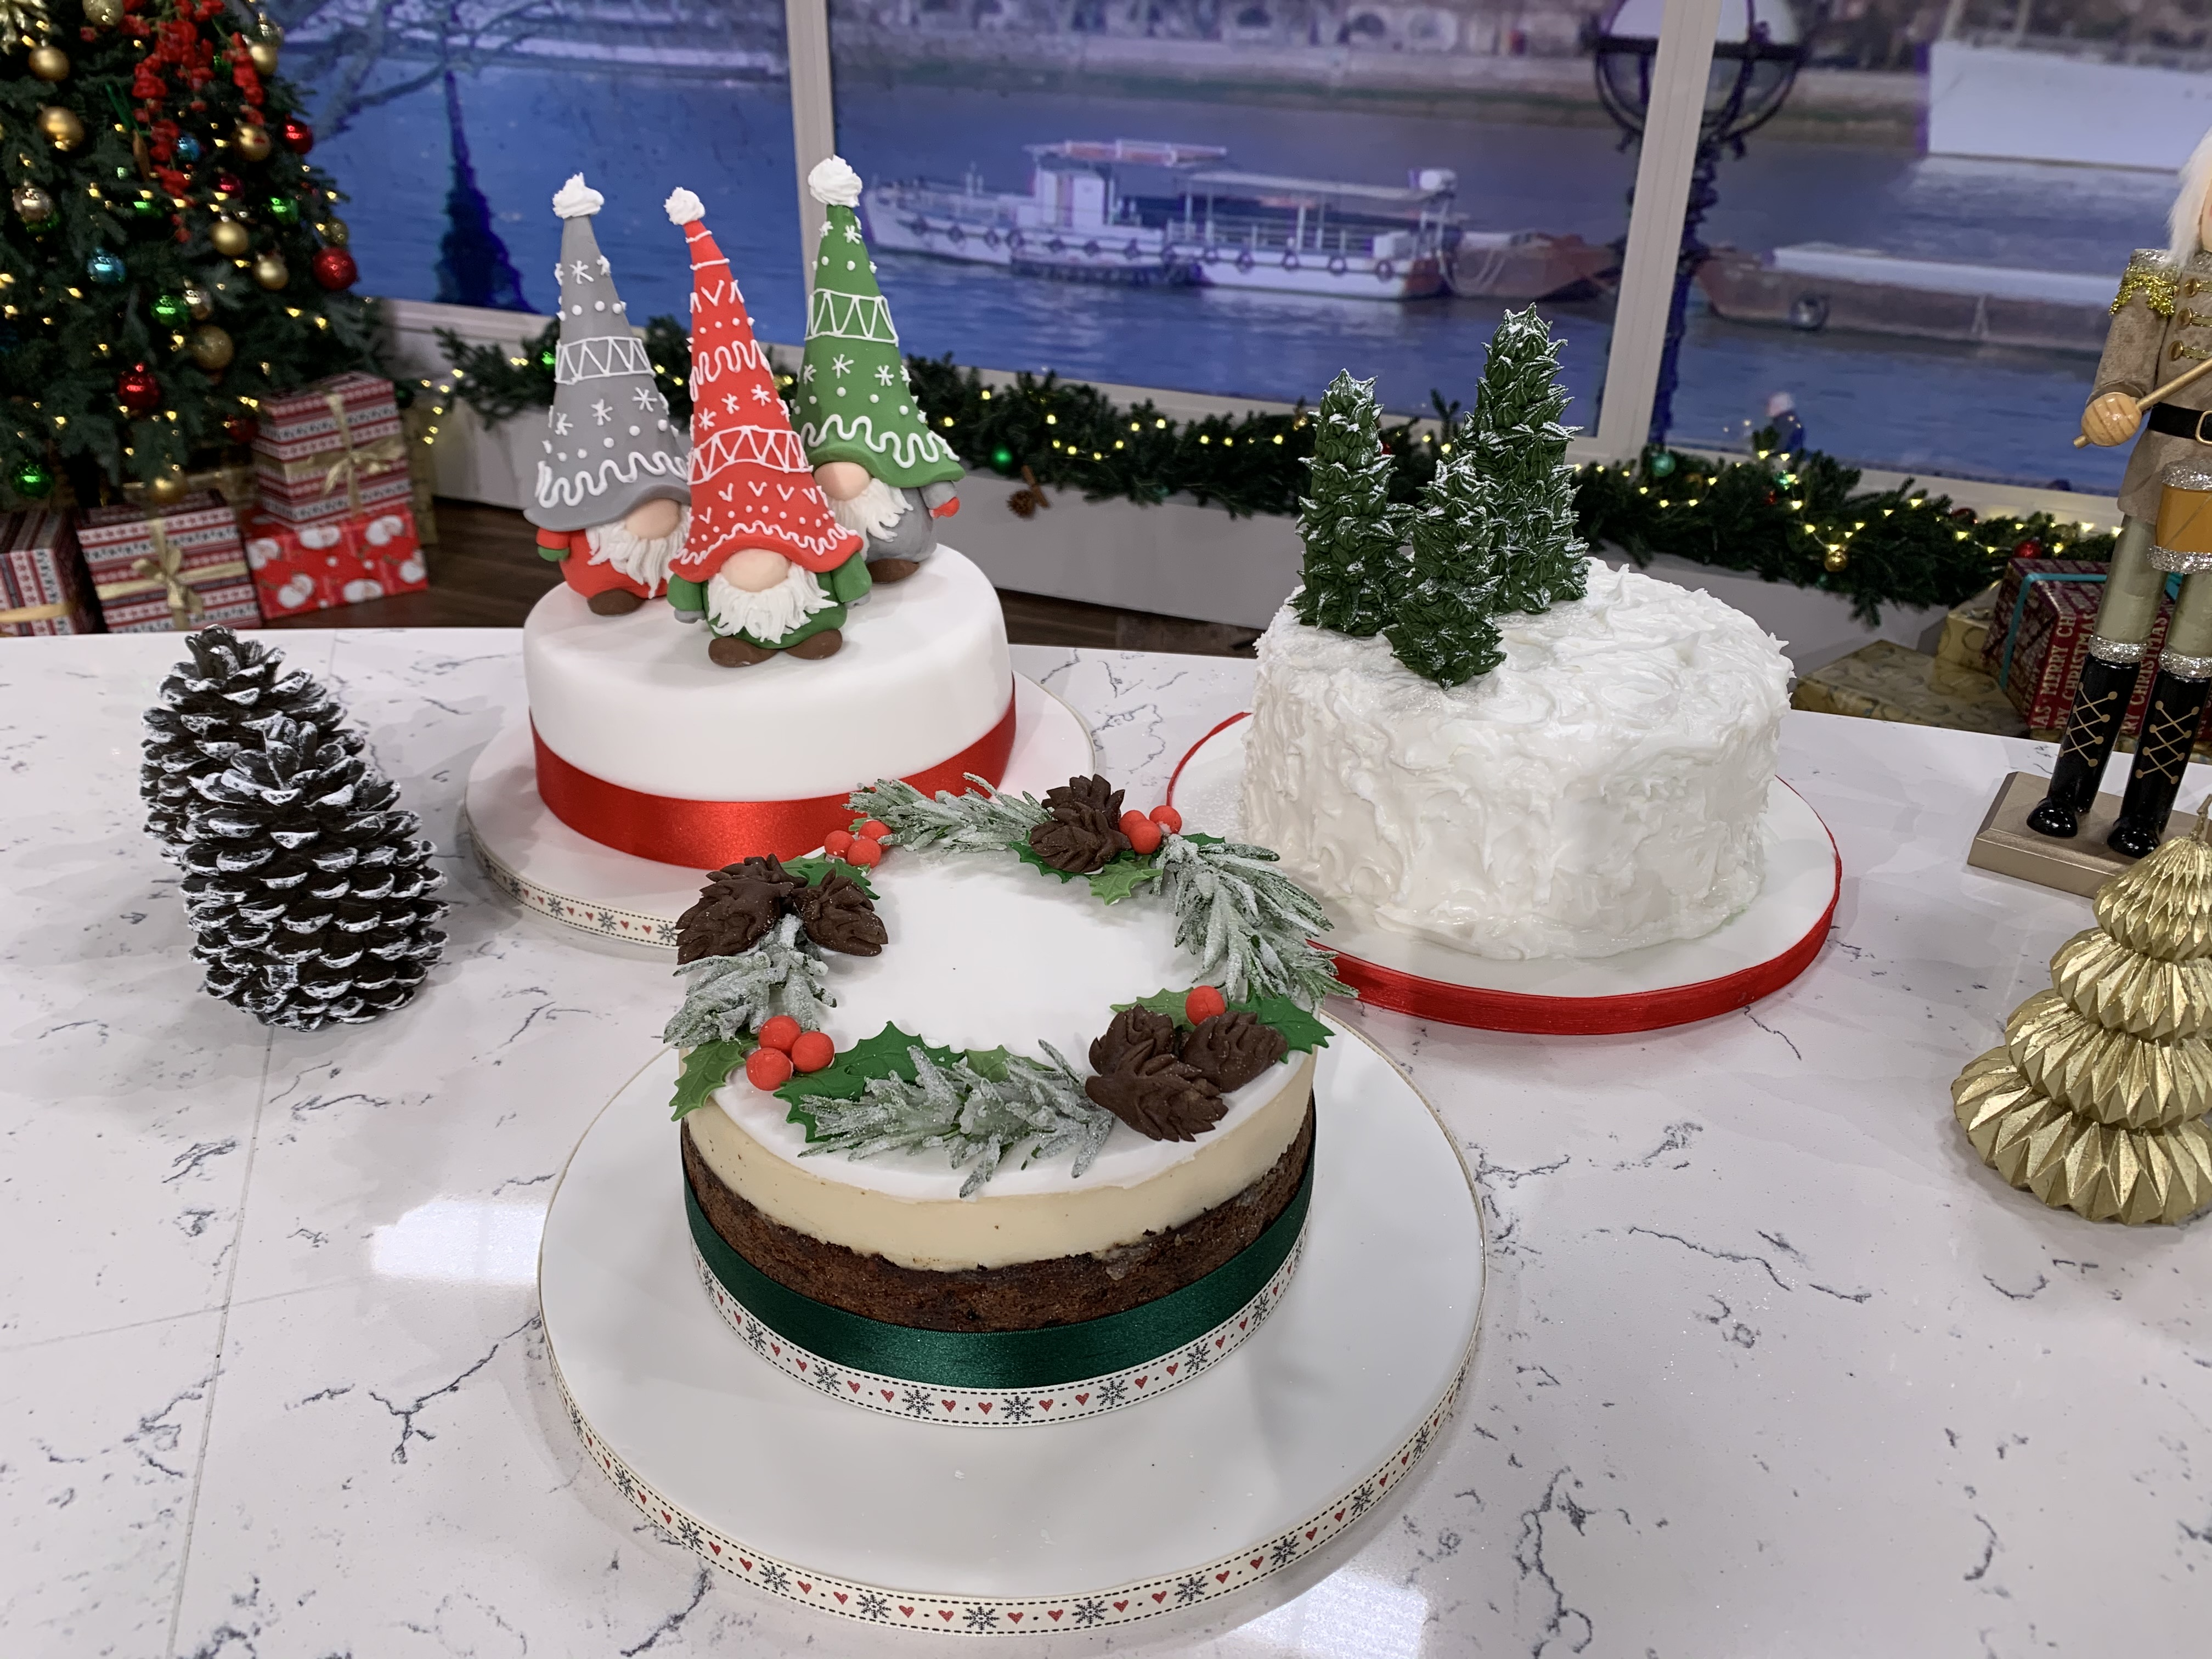 Juliet Sear\'s guide to decorating your Christmas cake | This Morning